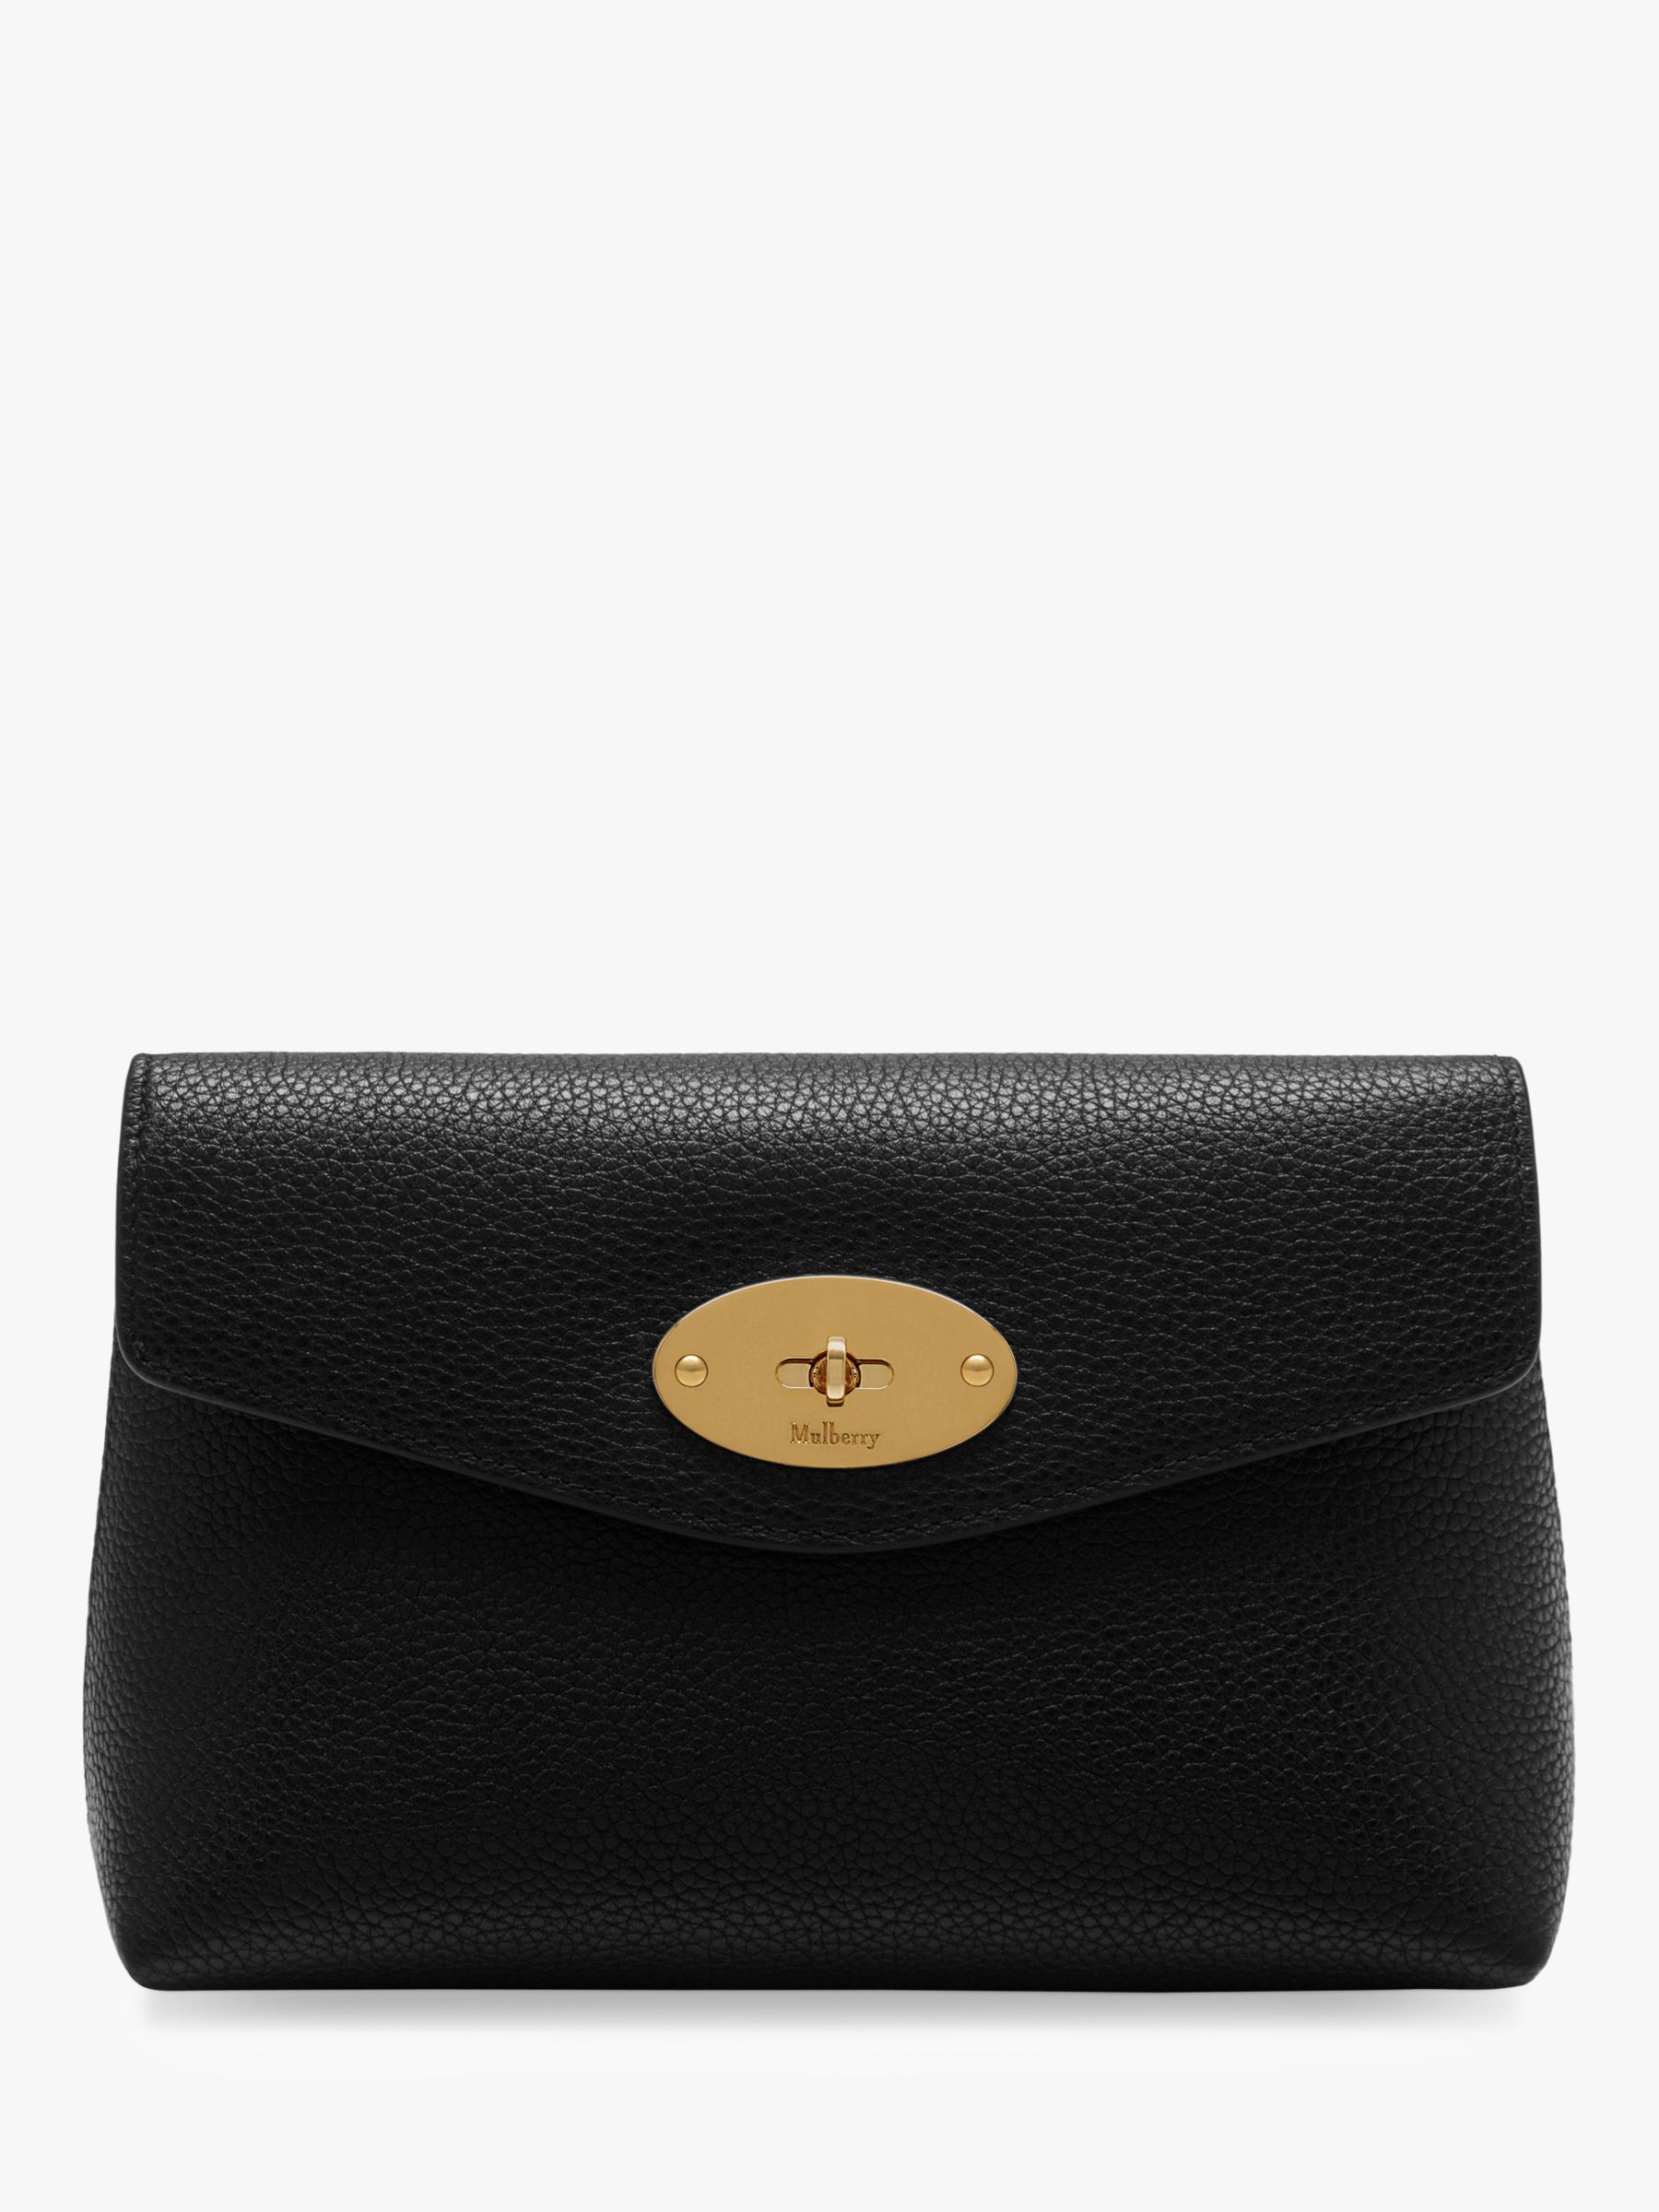 Mulberry Darley Classic Grain Leather Small Cosmetic Pouch, Black at ...